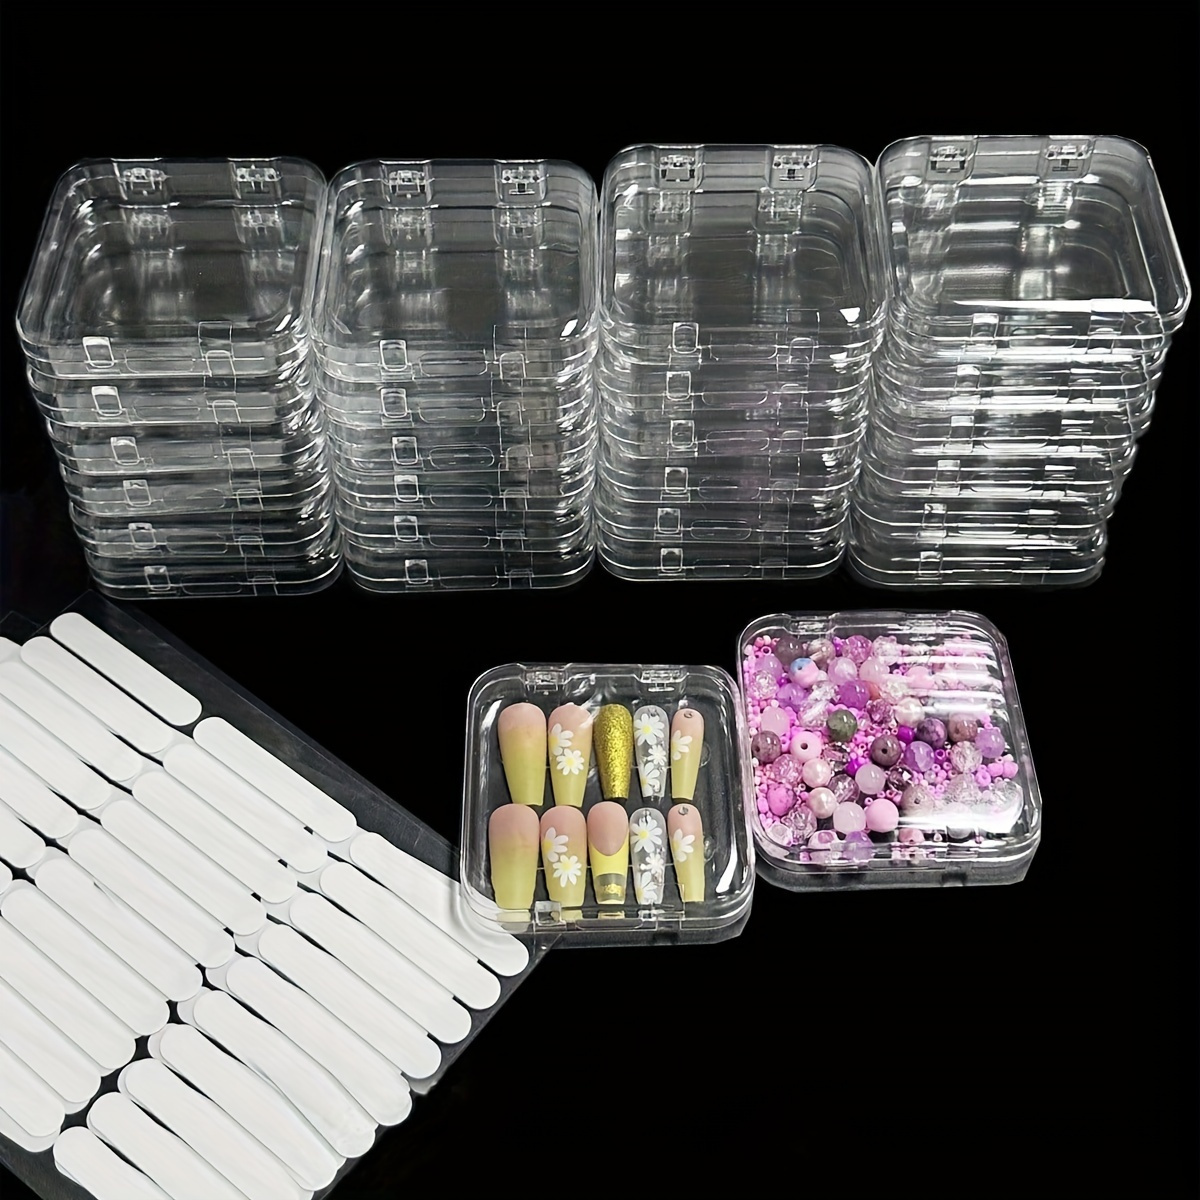 

24pcs Plastic Press-on Nail Storage Boxes, Classic Style Acrylic False Nail Display Cases, Clear Nail Holder Containers For Nail Salon Accessories And False Nail Organization